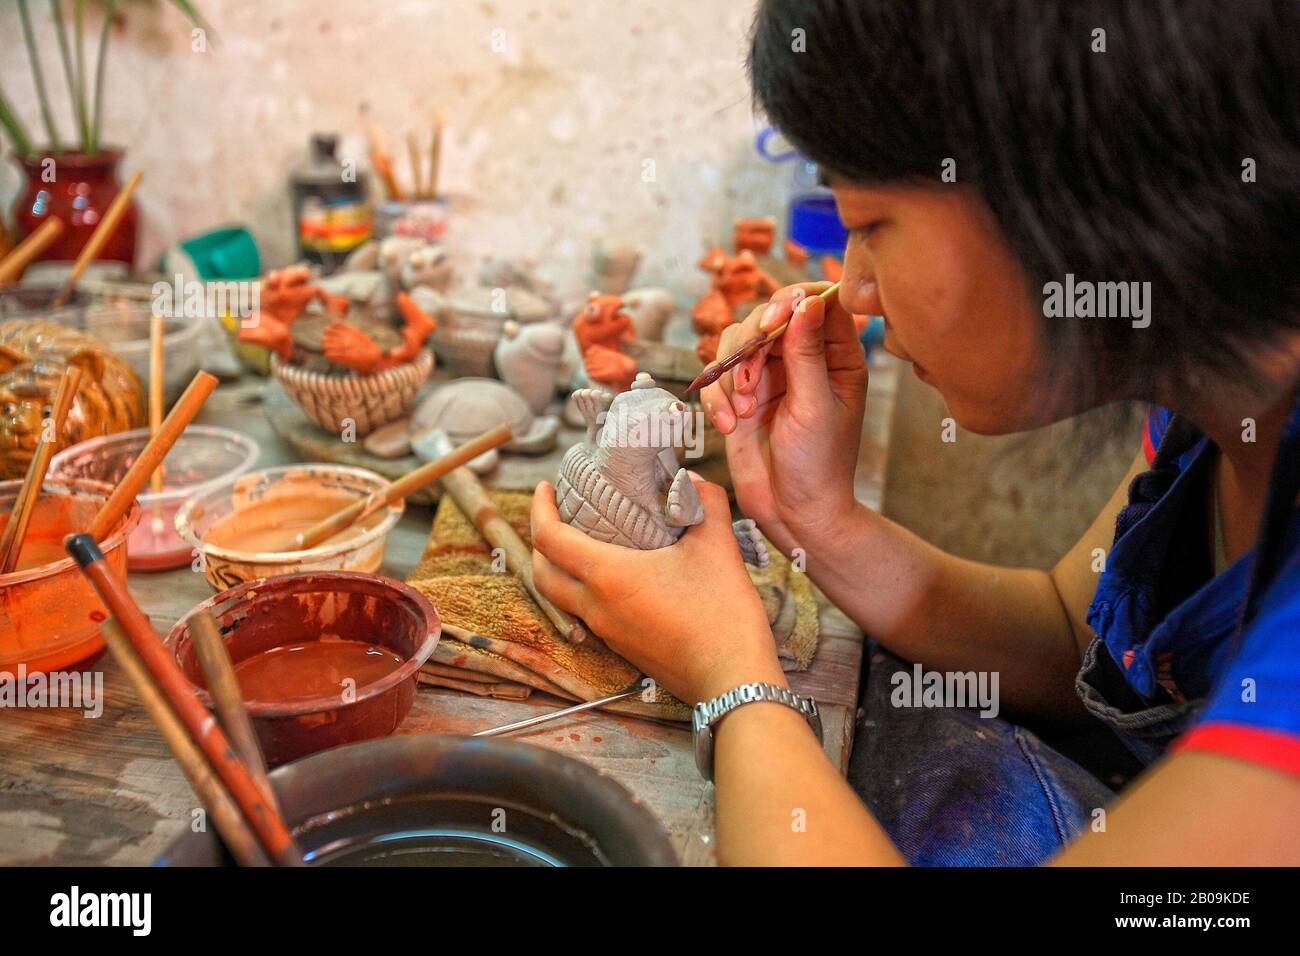 A woman paints a ceramic toy at her workshop in the Ceramic Village, Guangzhou Province, China. September 19, 2009. Stock Photo